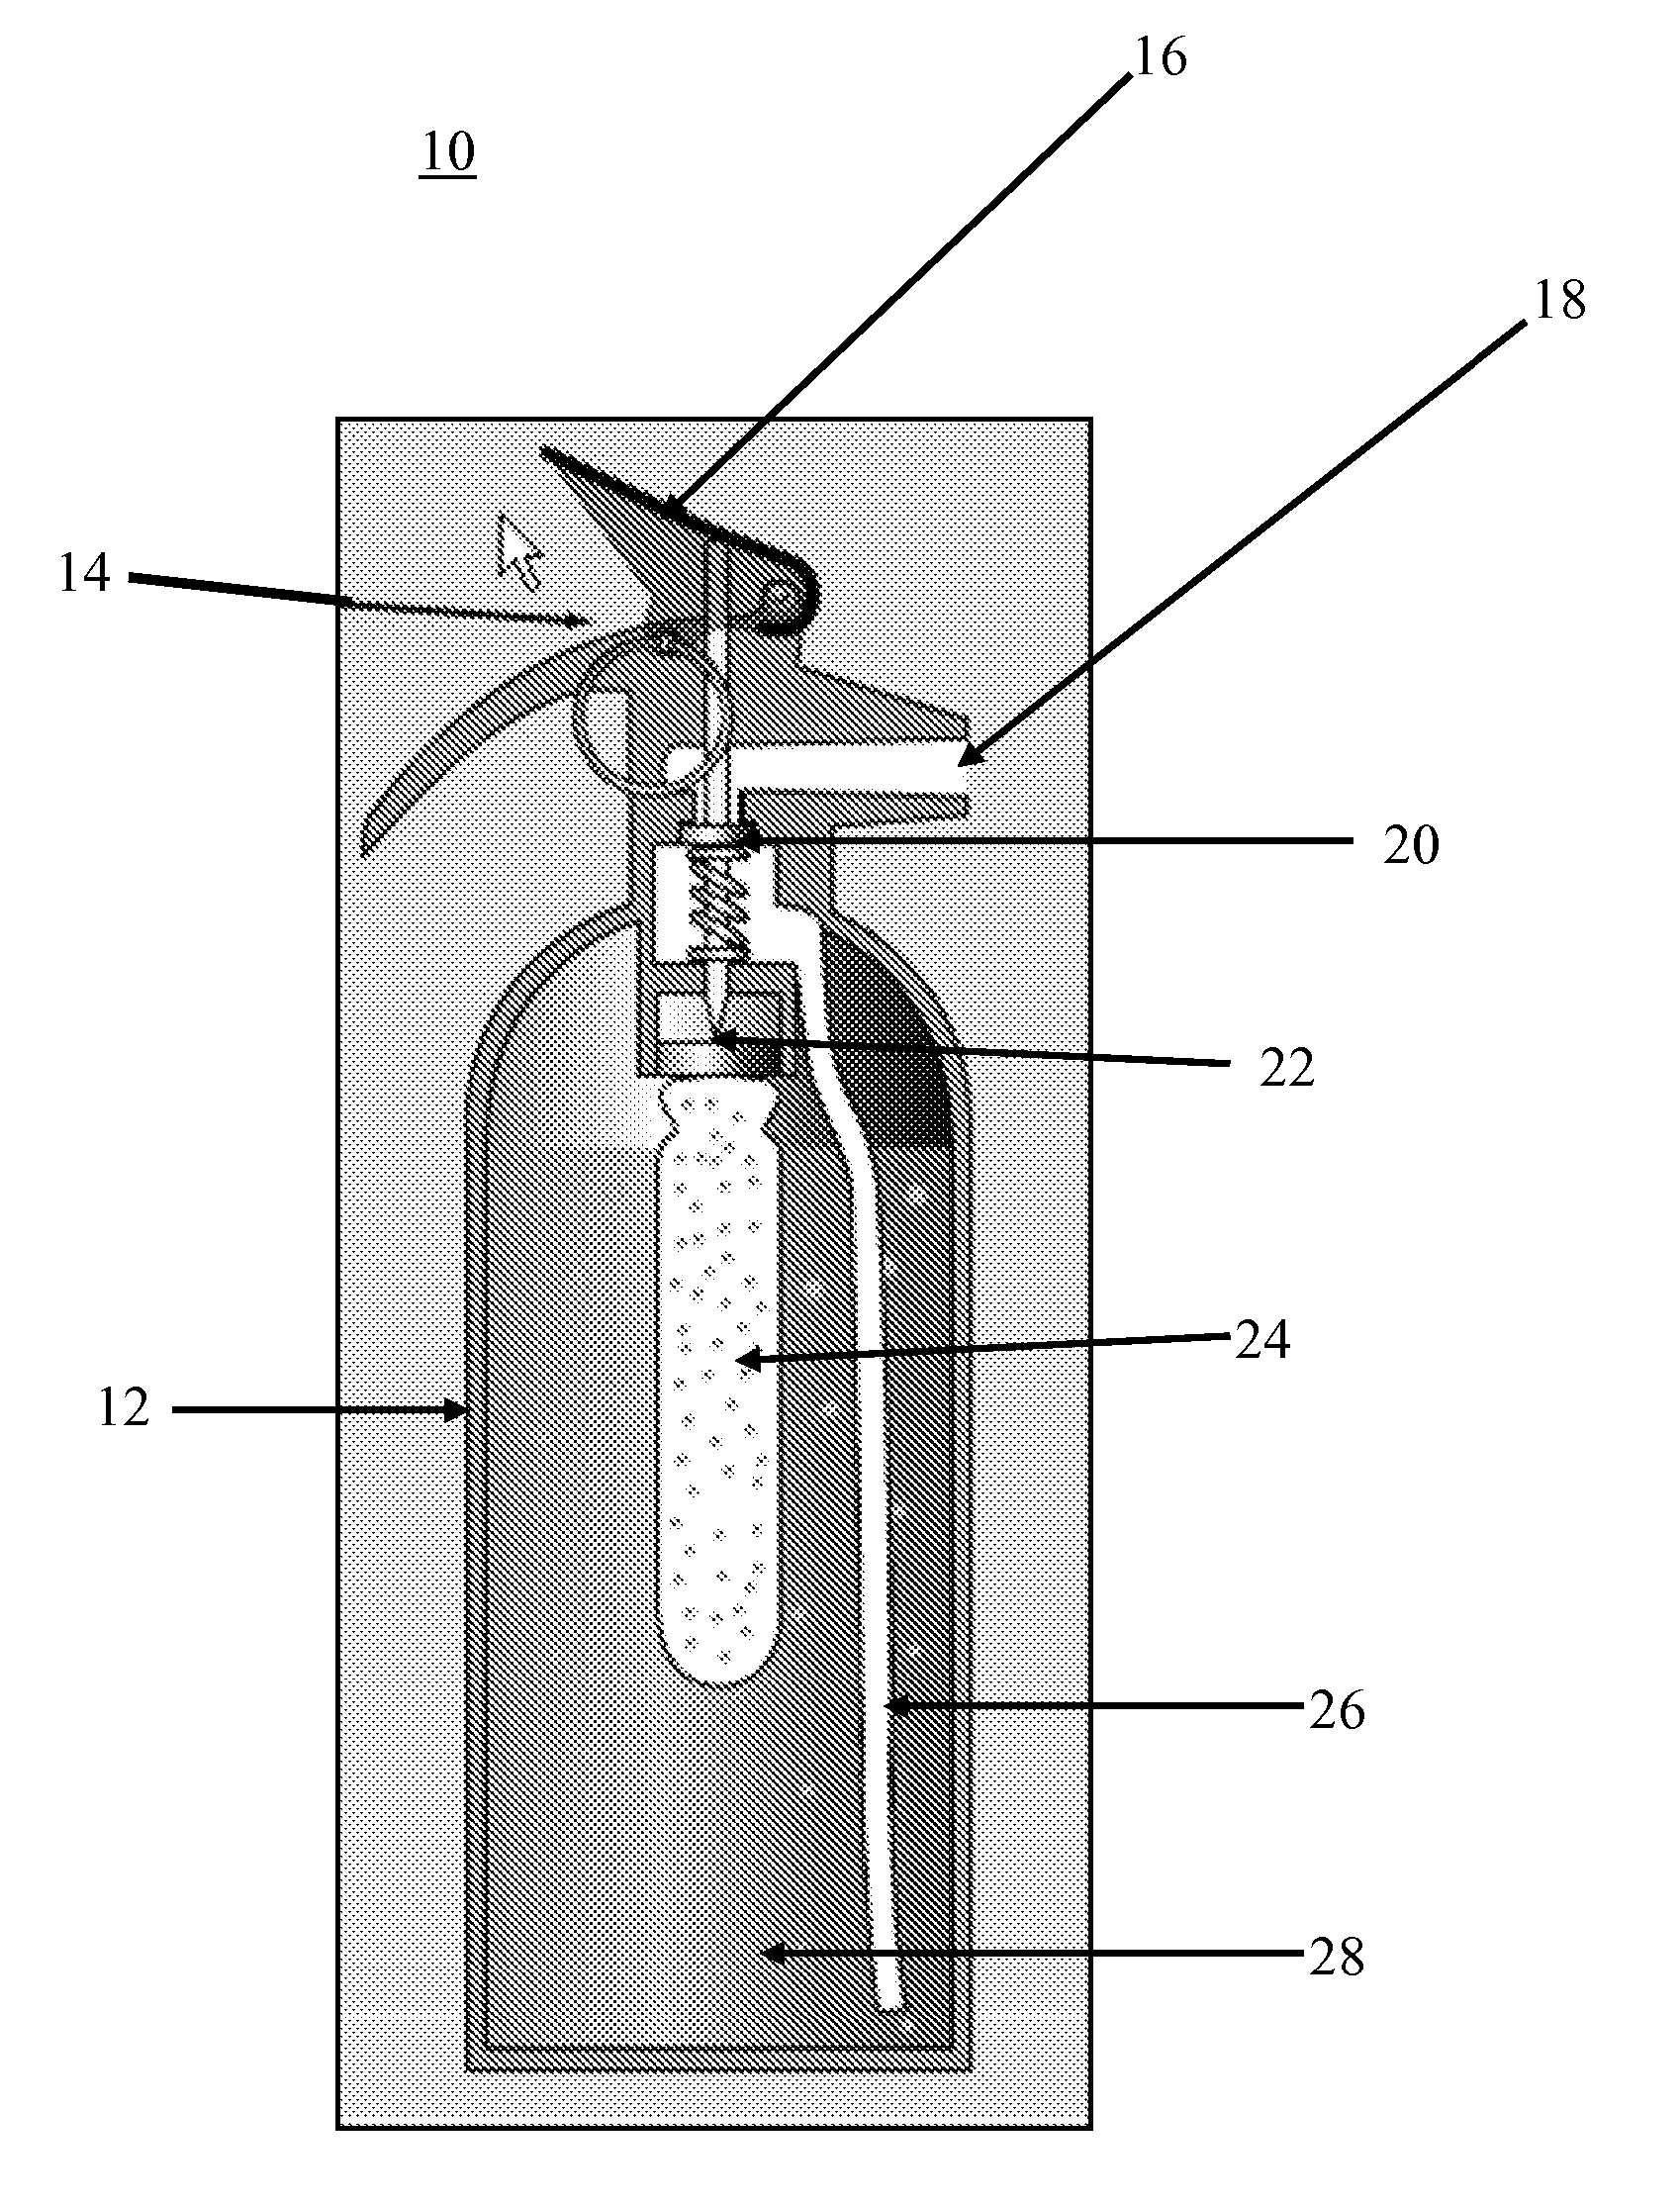 Method and apparatus for removing oil spills and extinguishing fires